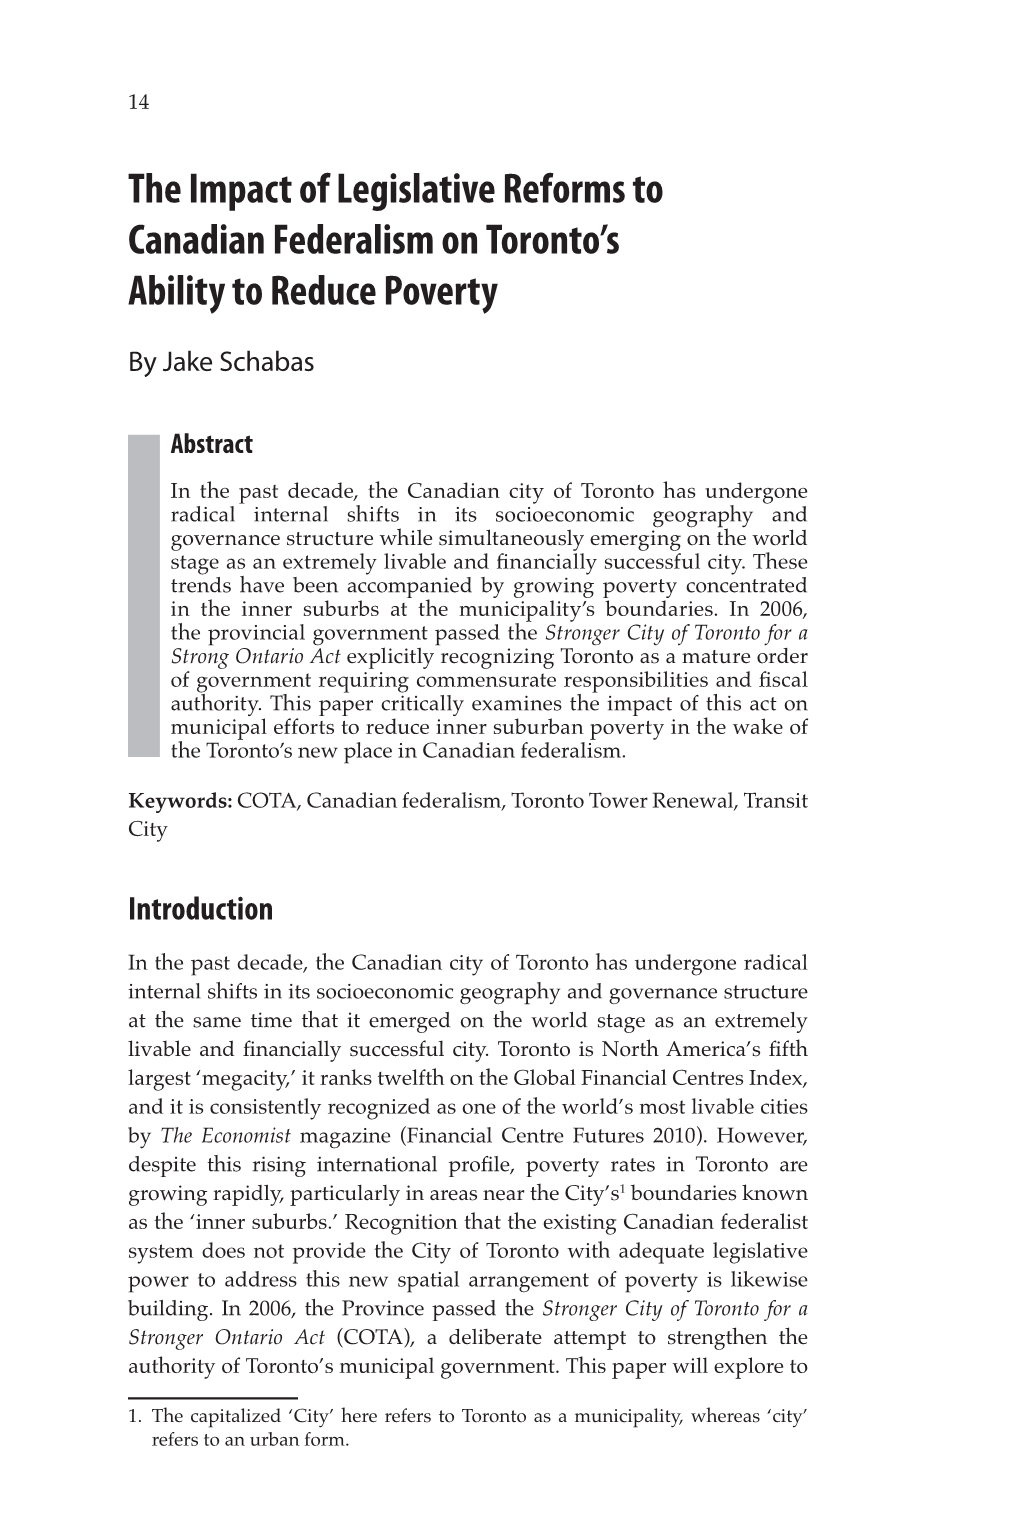 The Impact of Legislative Reforms to Canadian Federalism on Toronto’S Ability to Reduce Poverty